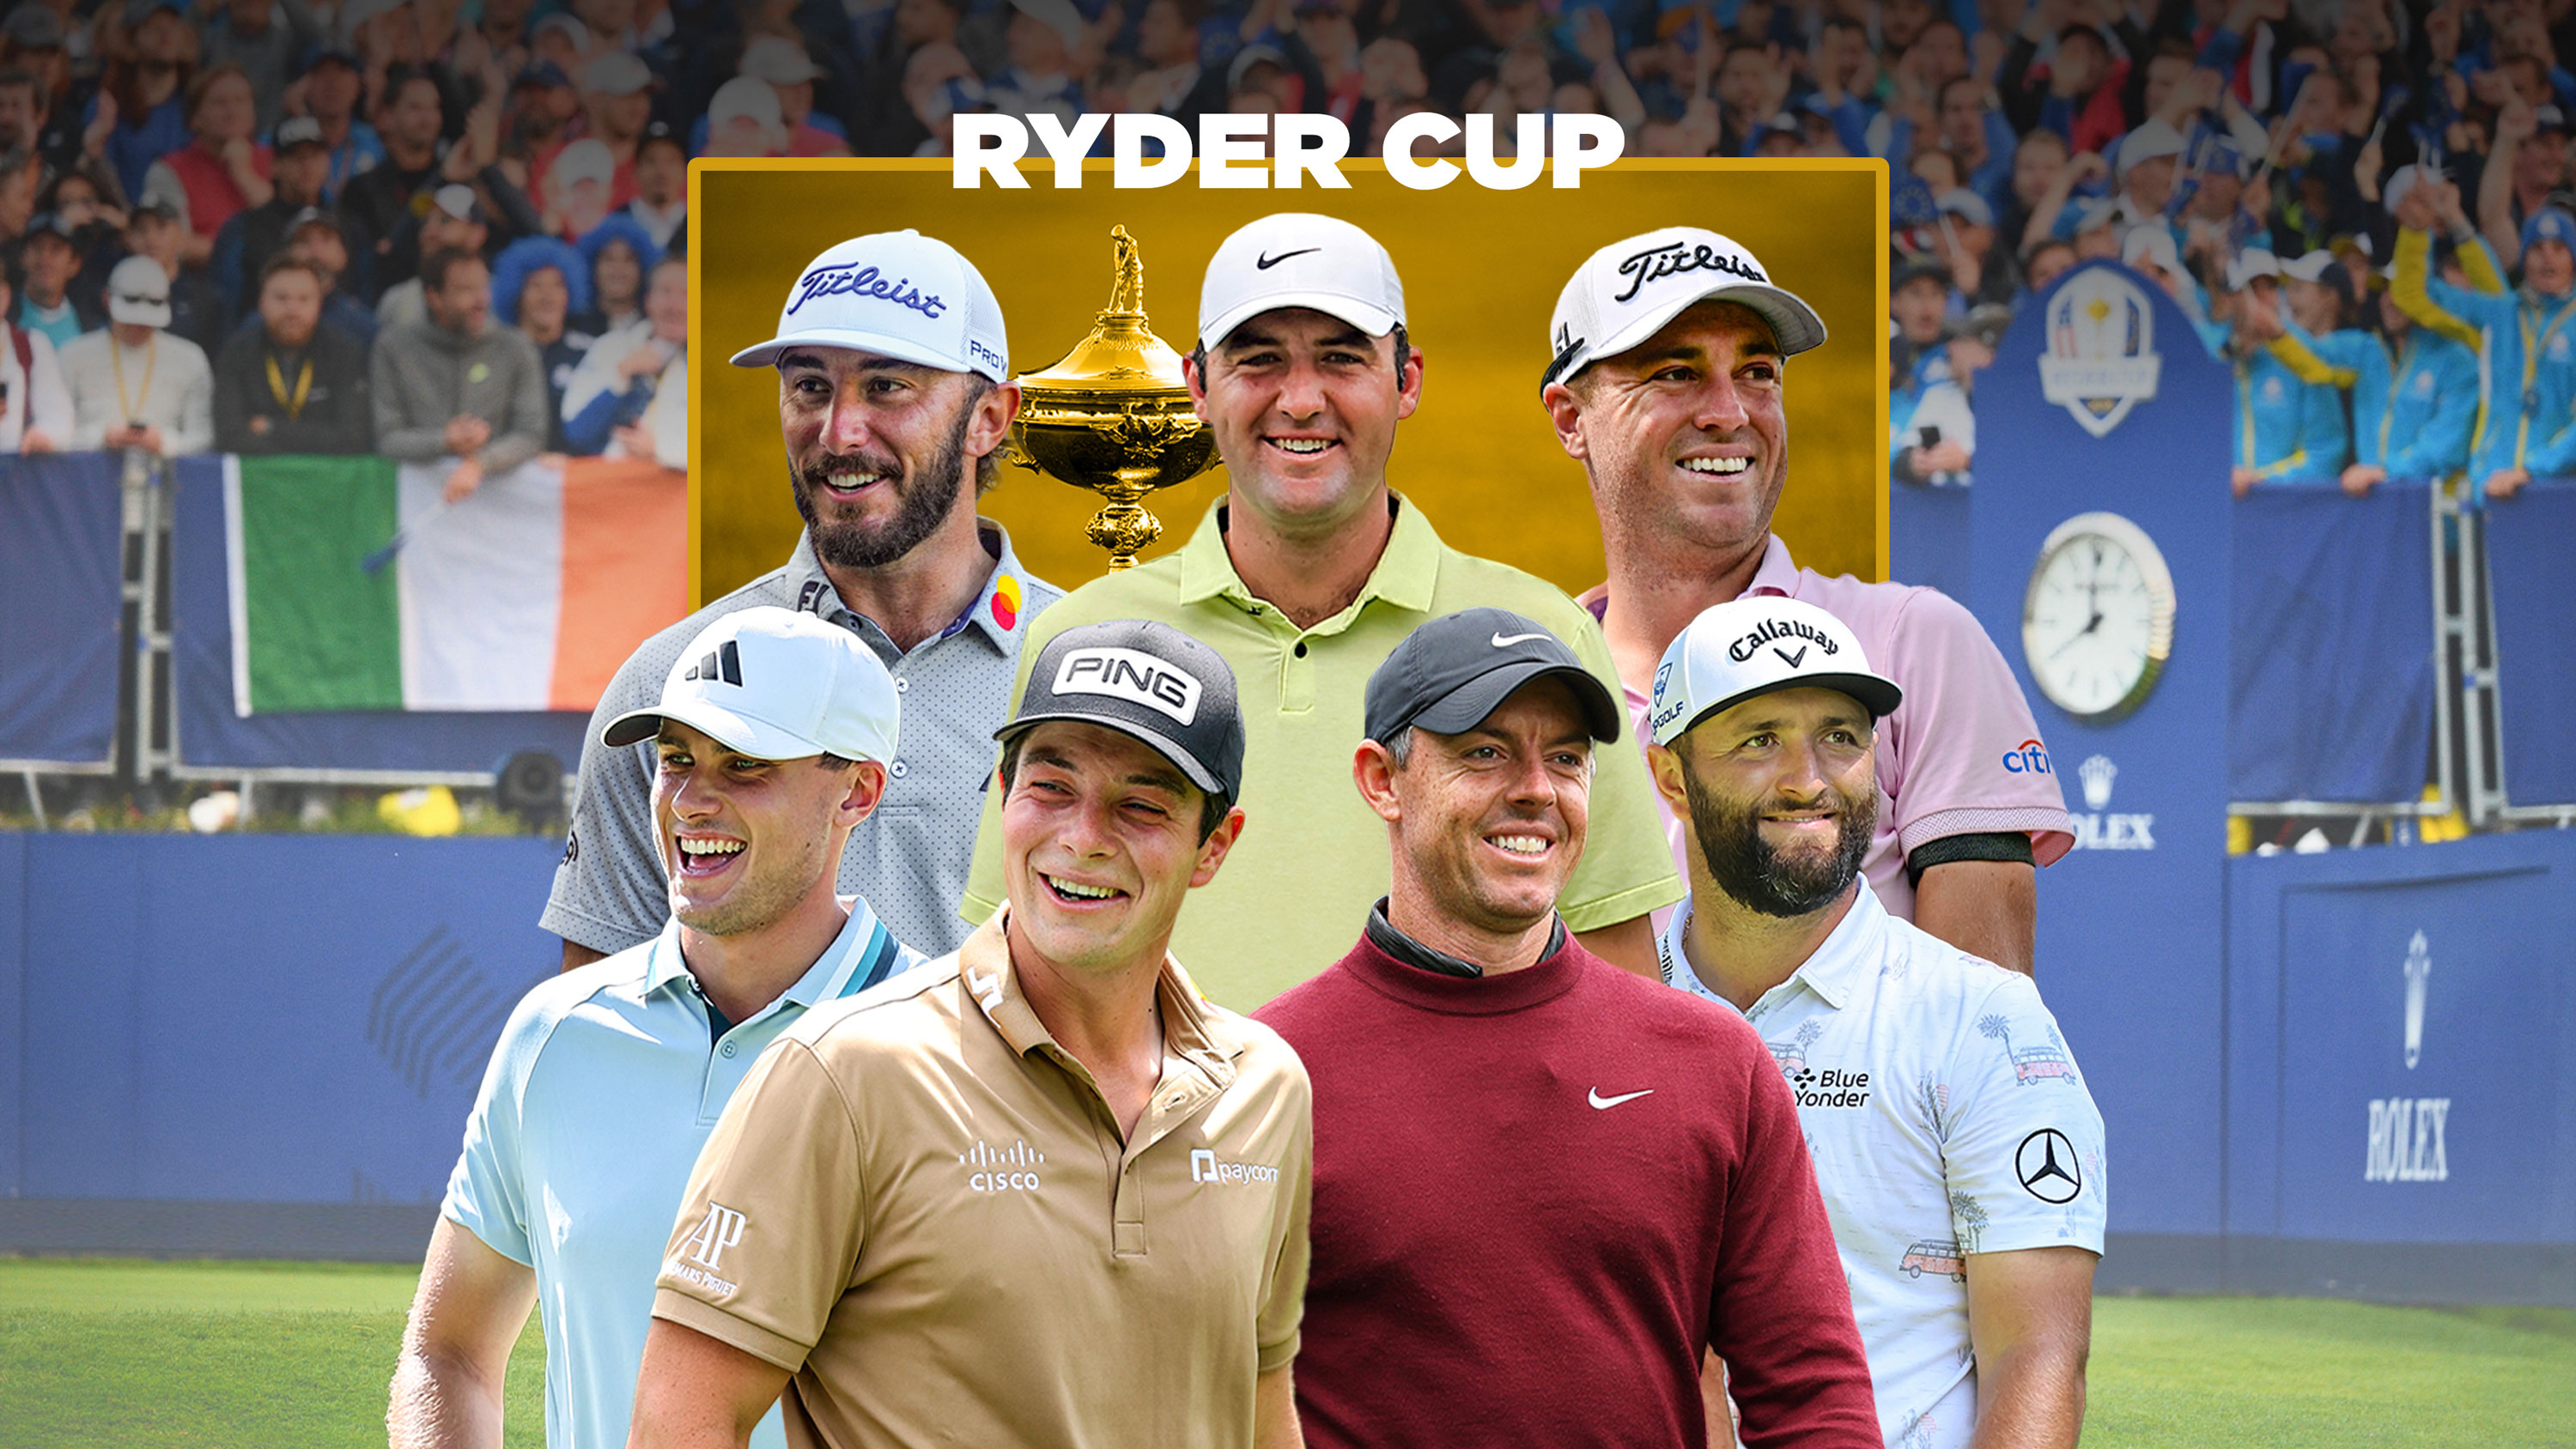 Three Types of Games Driving Fan Engagement for the Ryder Cup